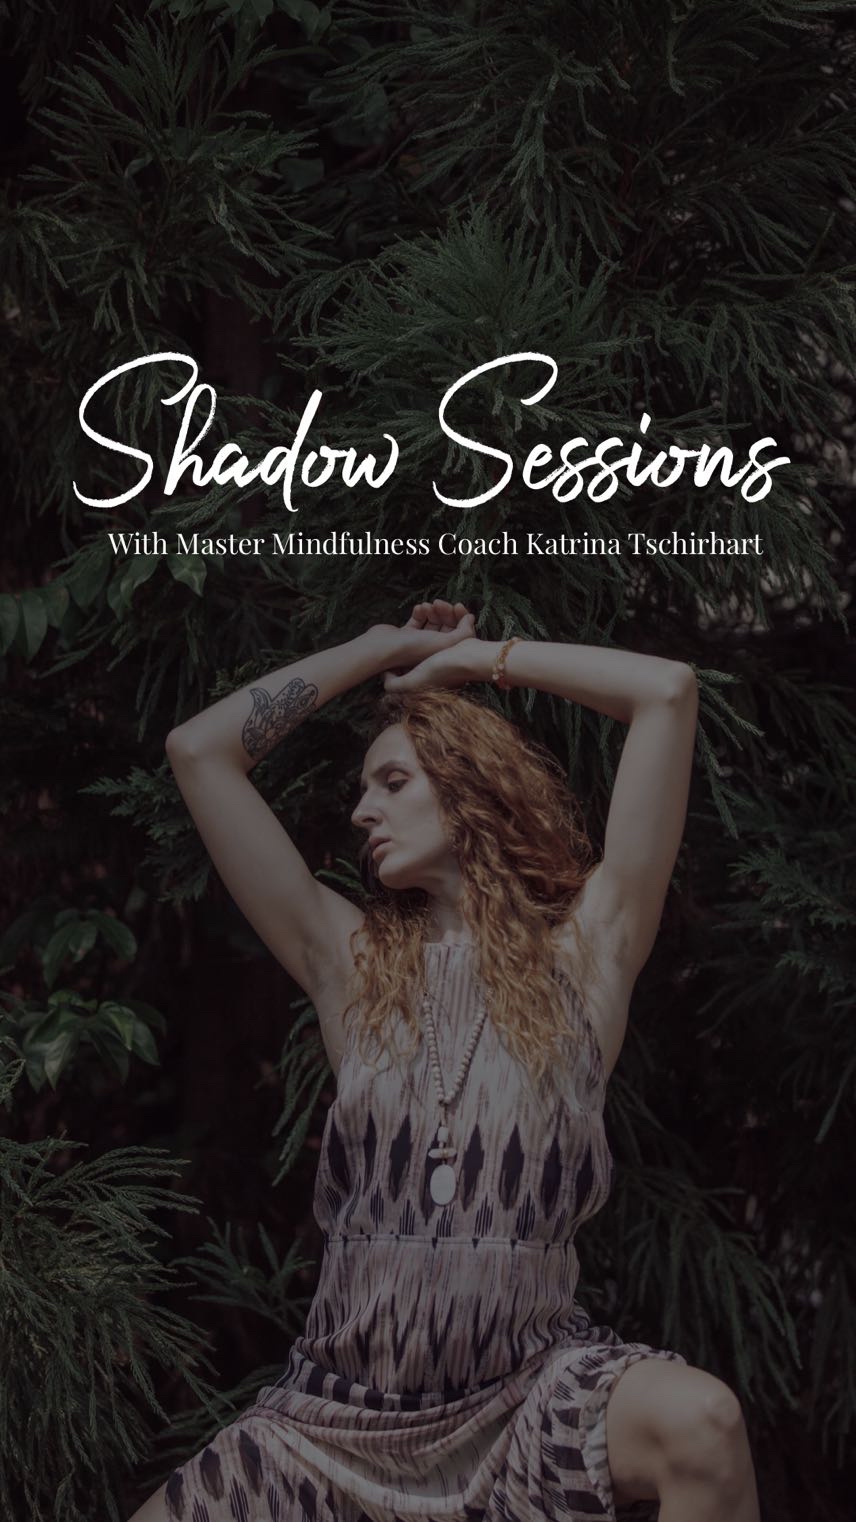 Shadow Sessions with Master Mindfulness Coach Katrina Tschirhart